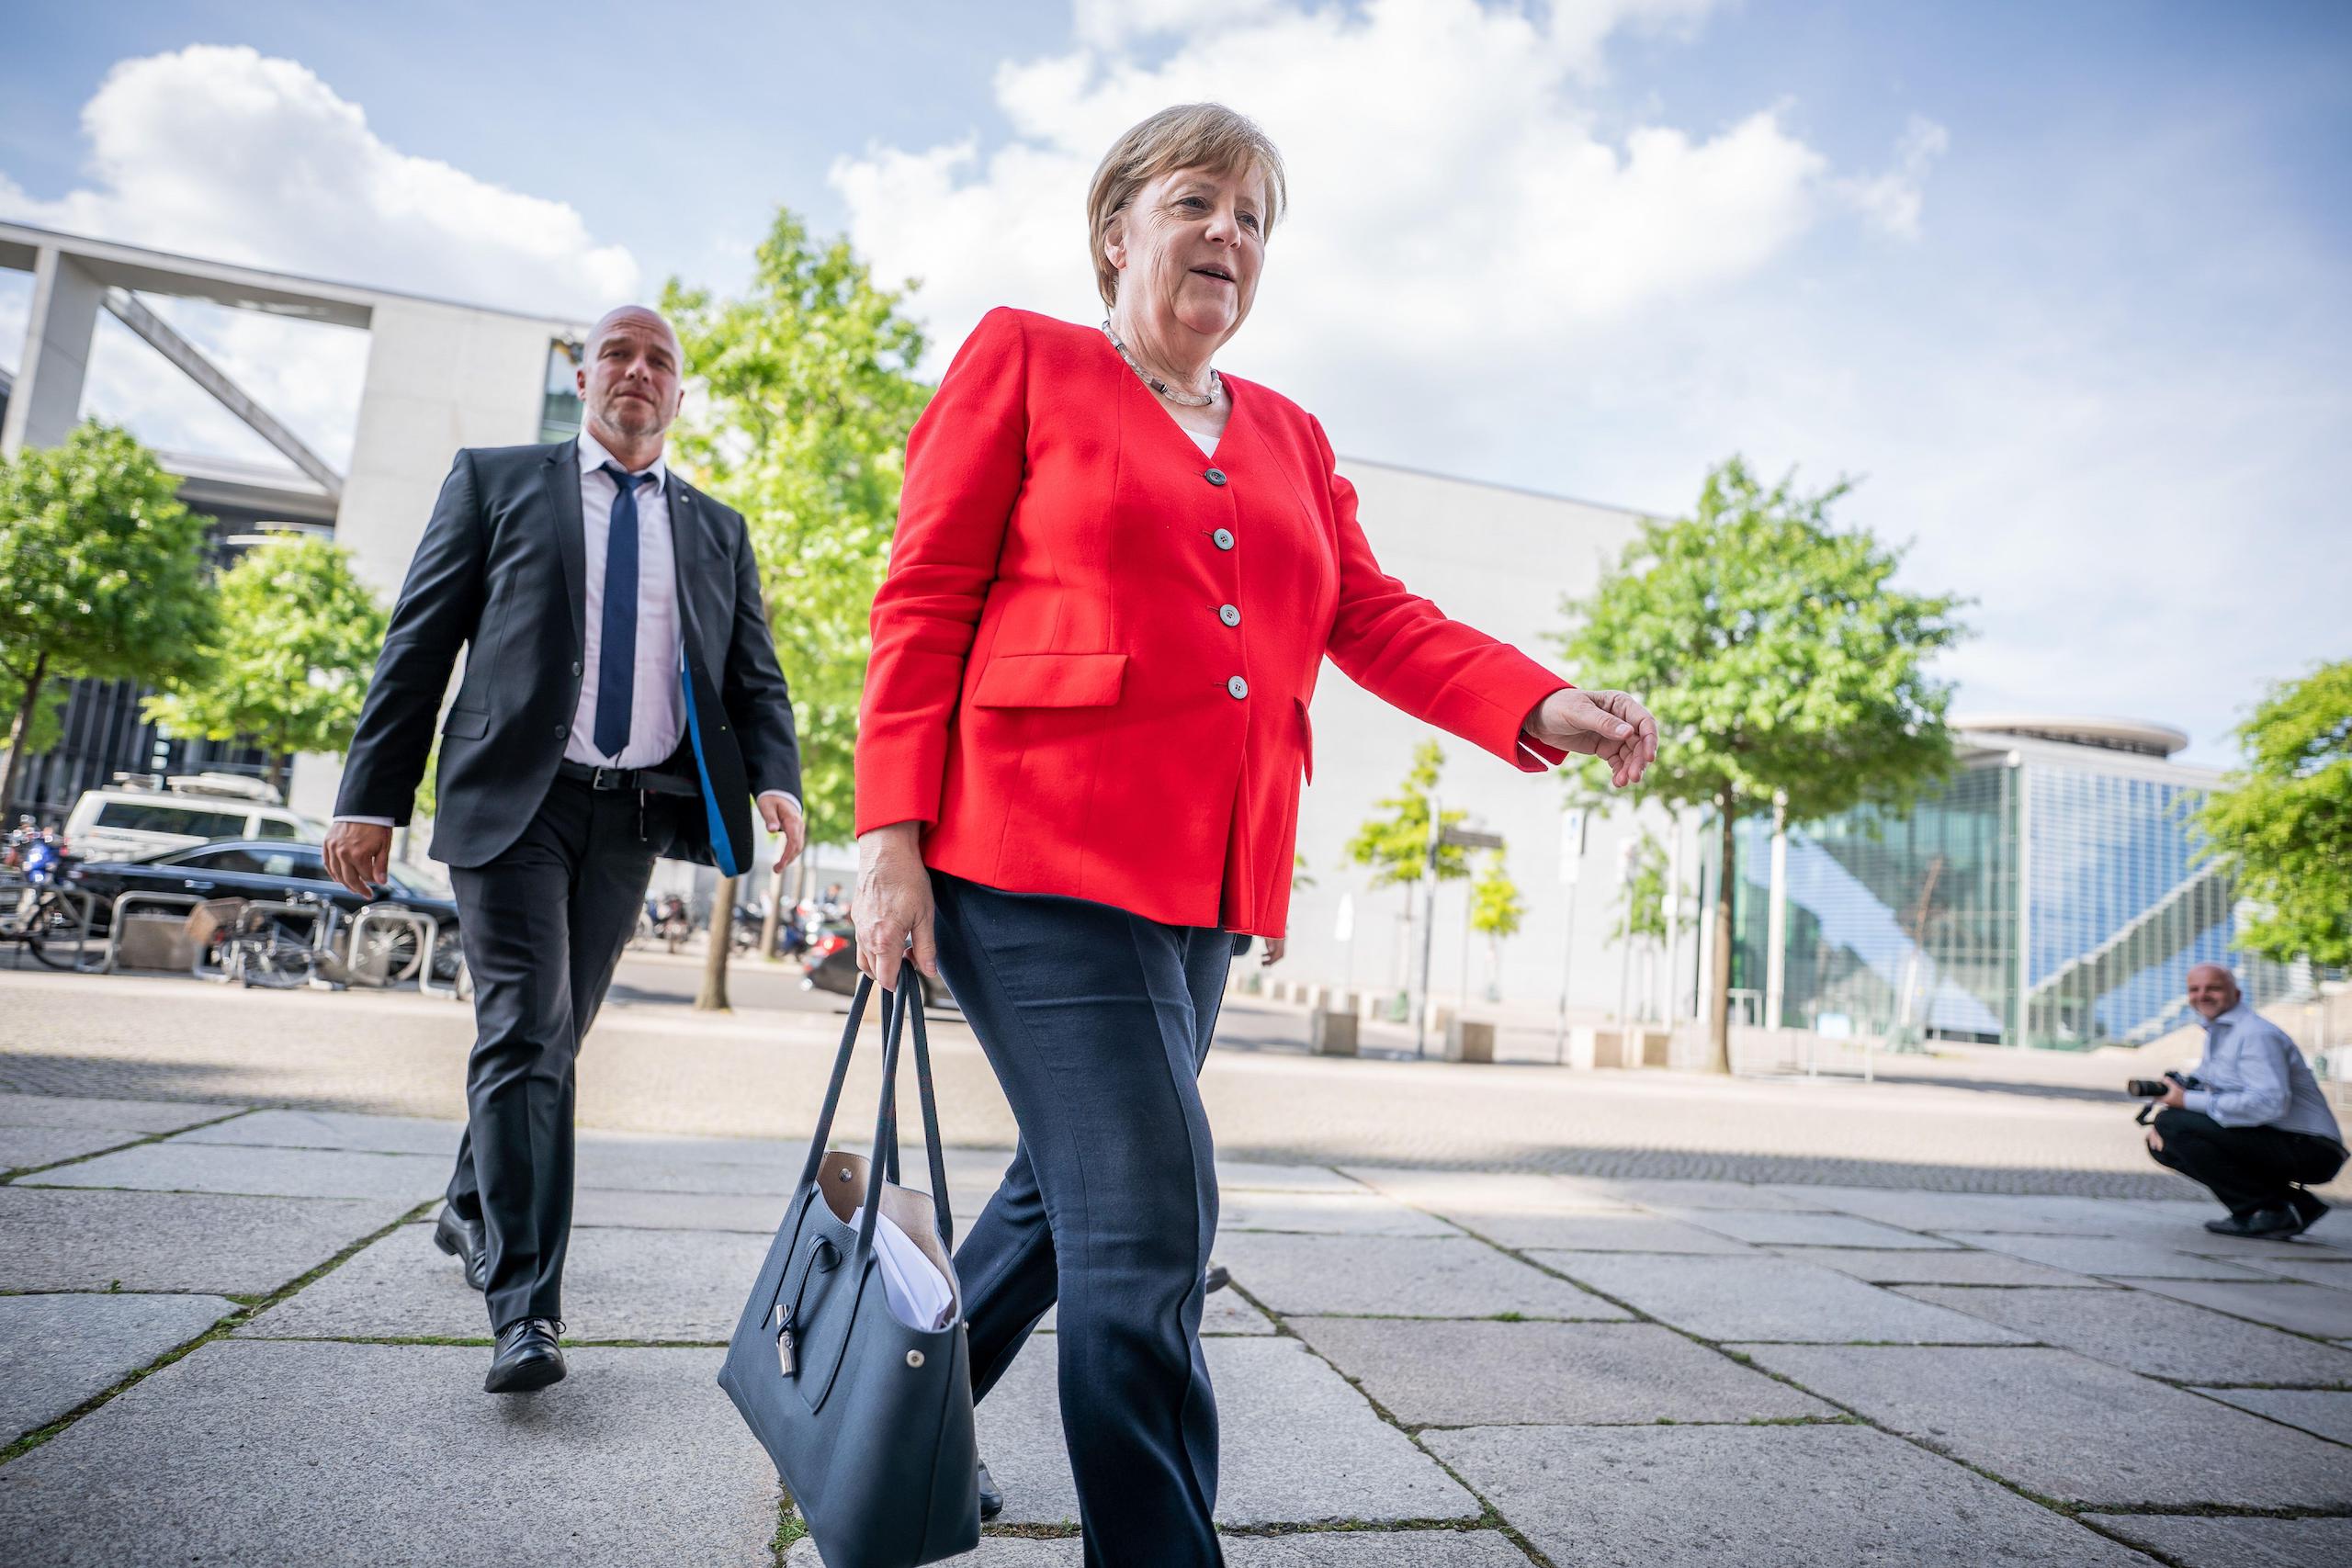 <p>Angela Merkel, who will step down at the upcoming national elections, has been nicknamed “Climate Chancellor” for her long-standing international engagement on emissions cuts (Image: Michael Kappeler / Alamy)</p>